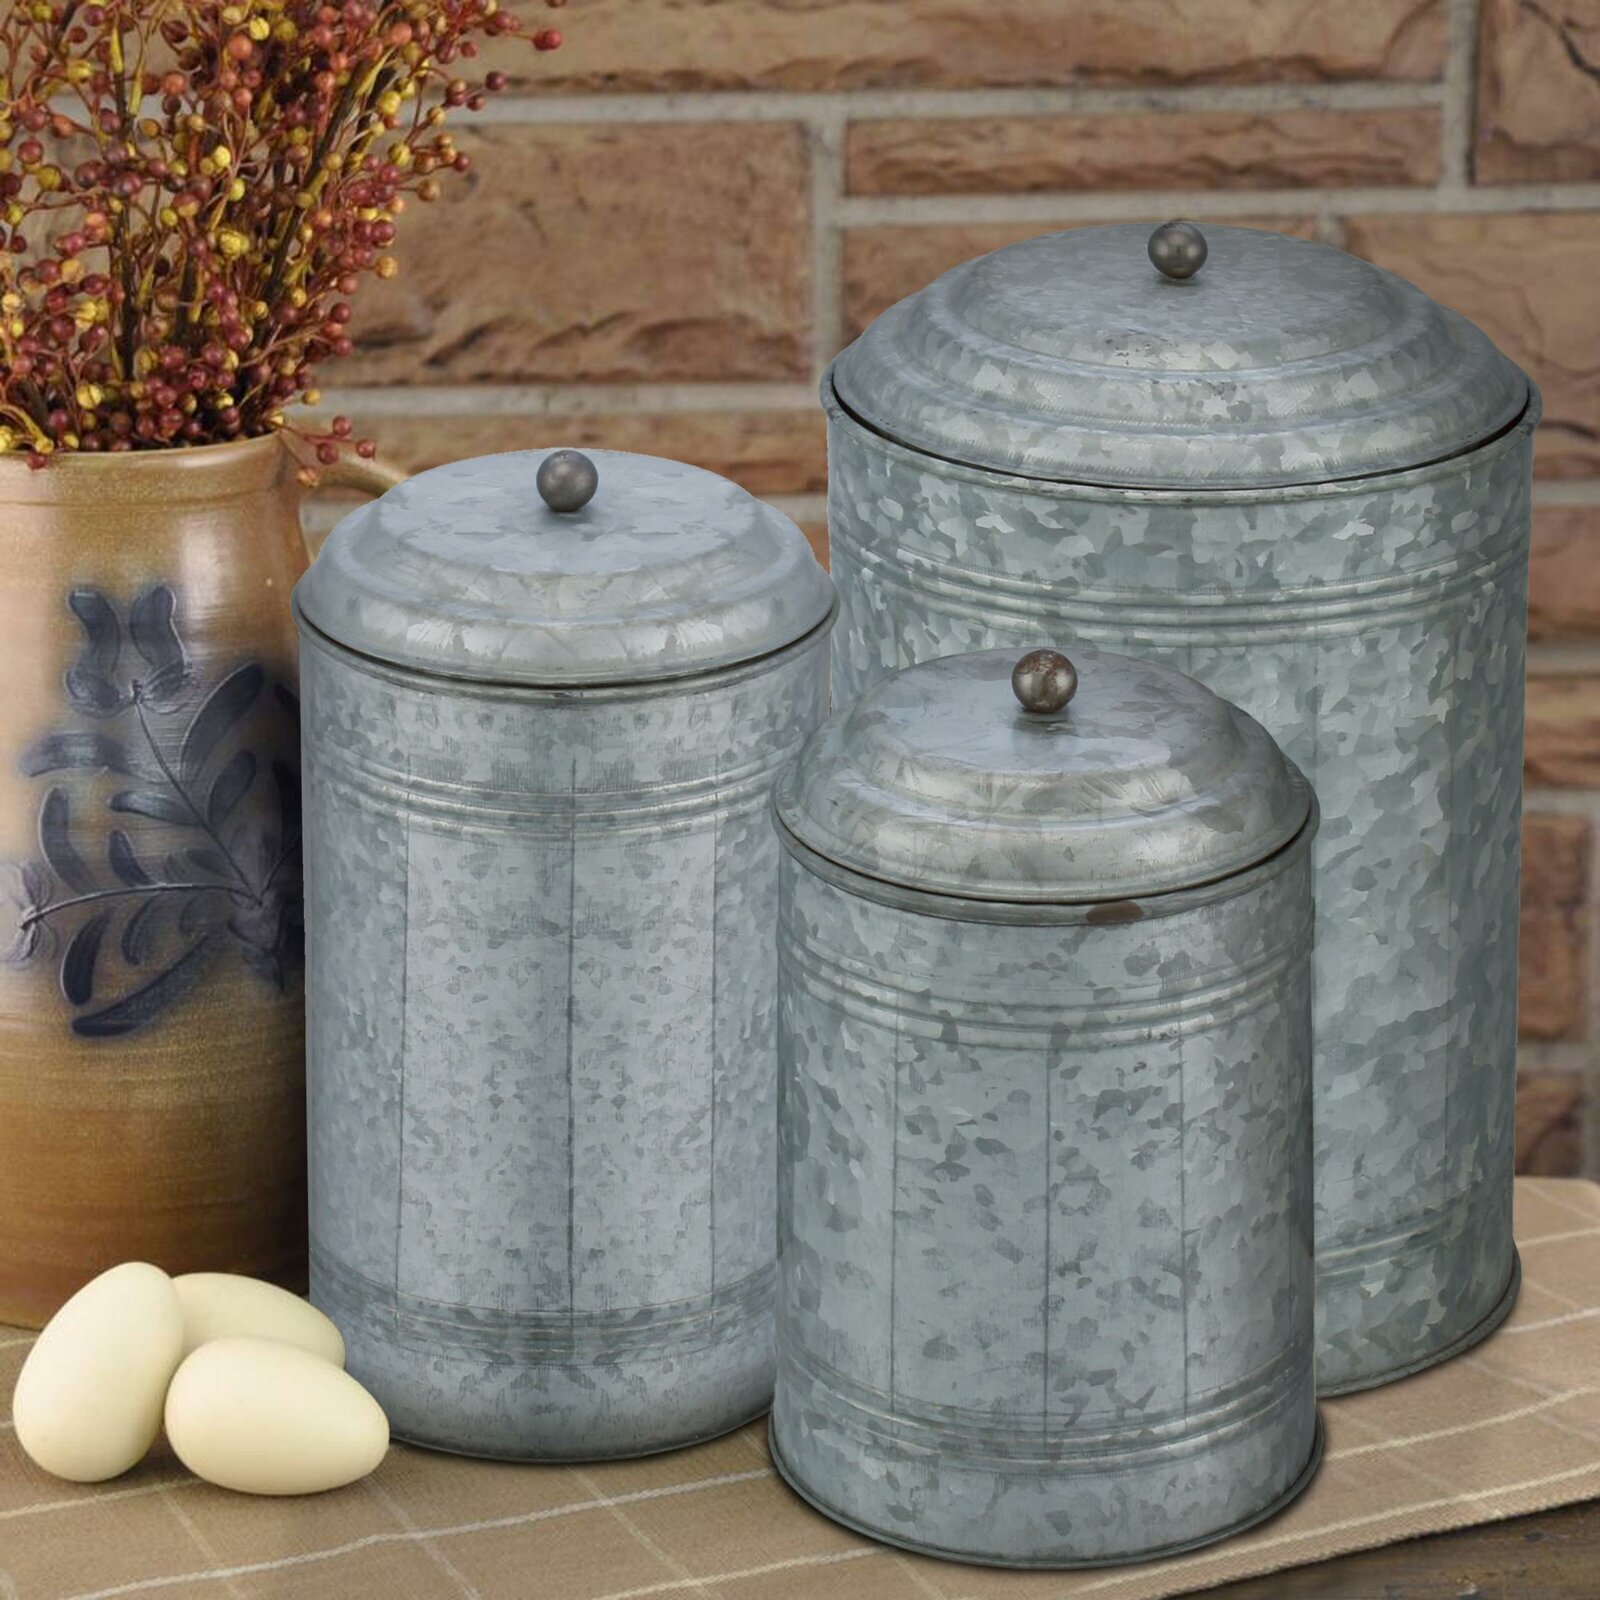 Vintage Metal Canisters With Galvanized Finish